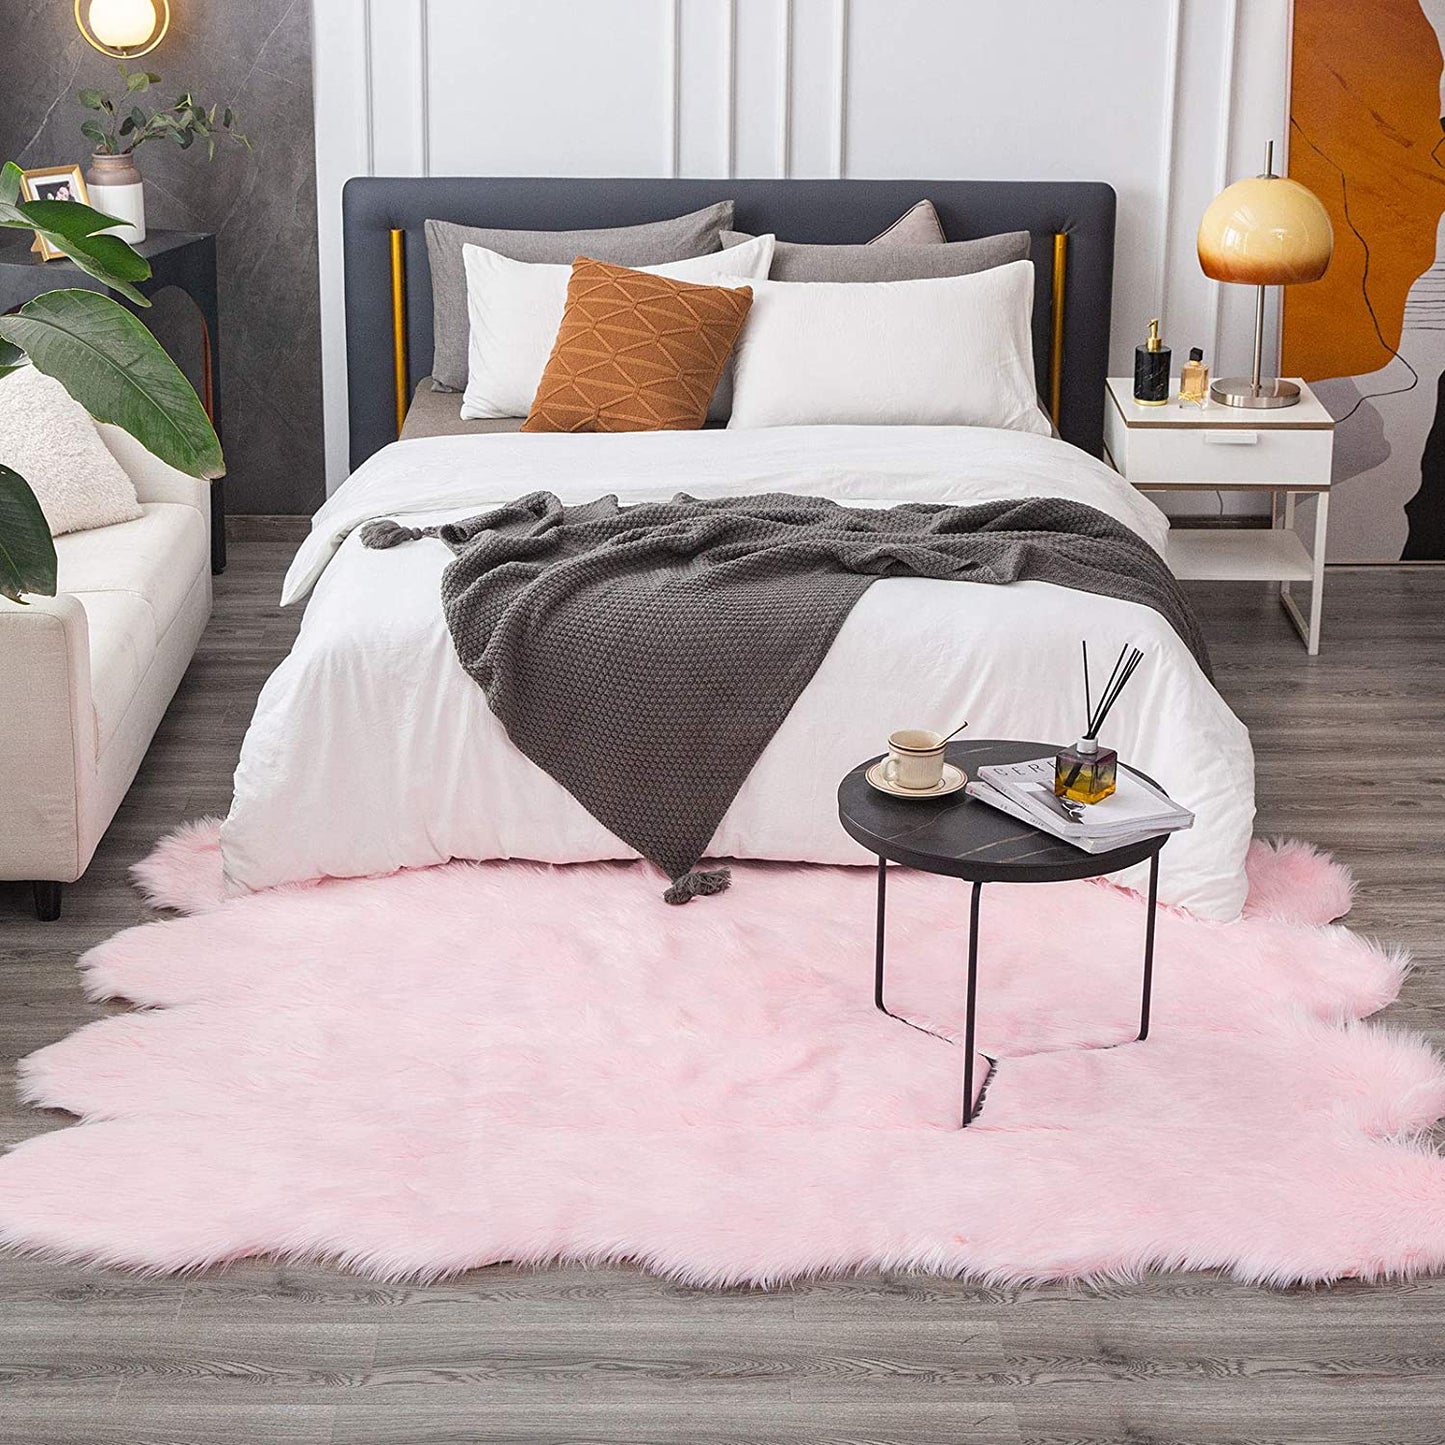 Sheepskin Fur Chair Couch Cover Area Rug, Pink